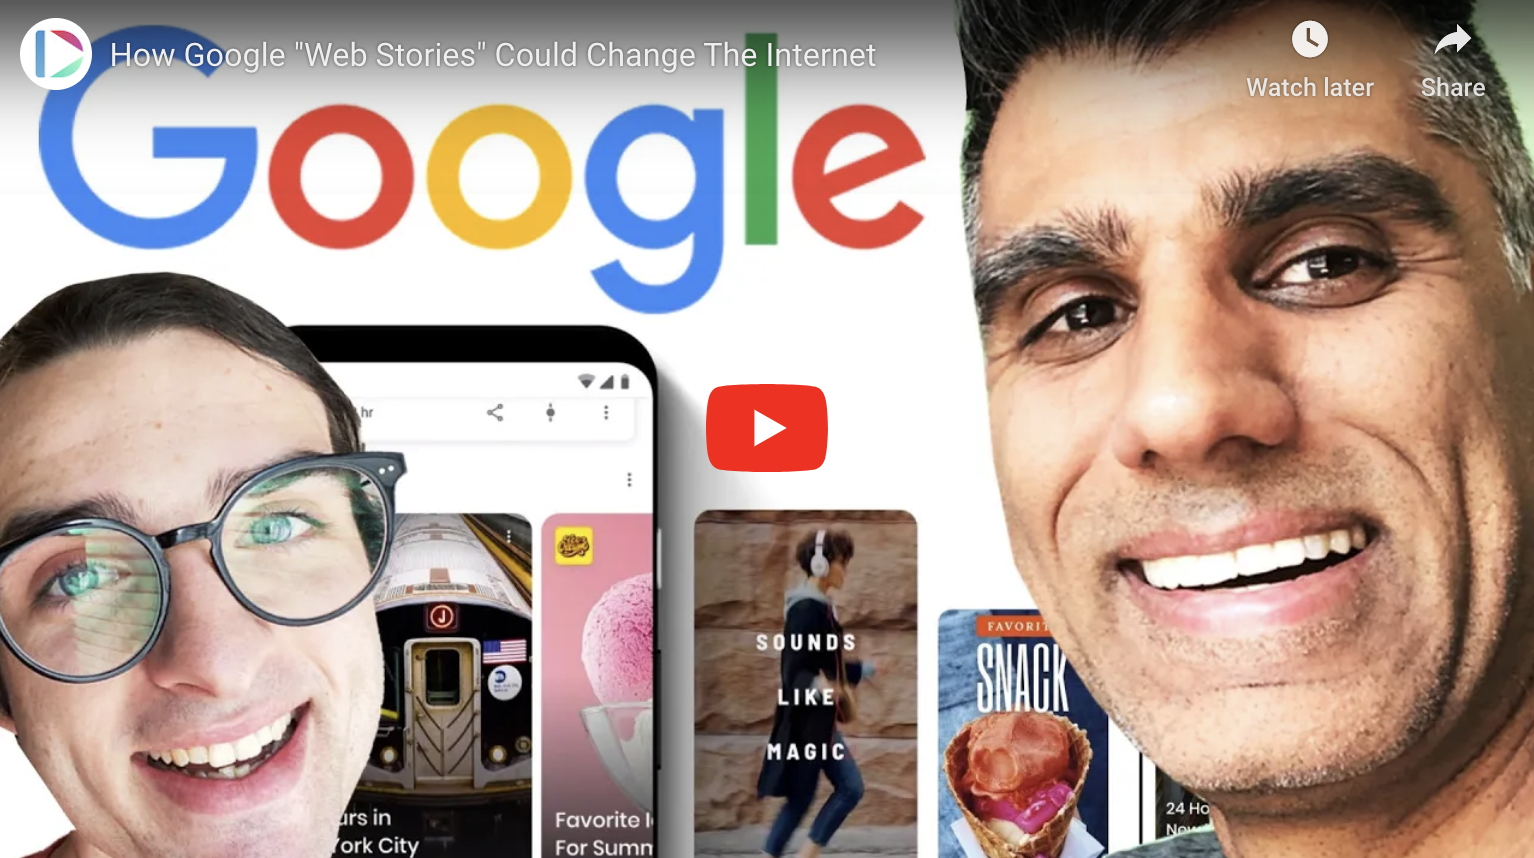 How Google Web Stories Could Change the Internet